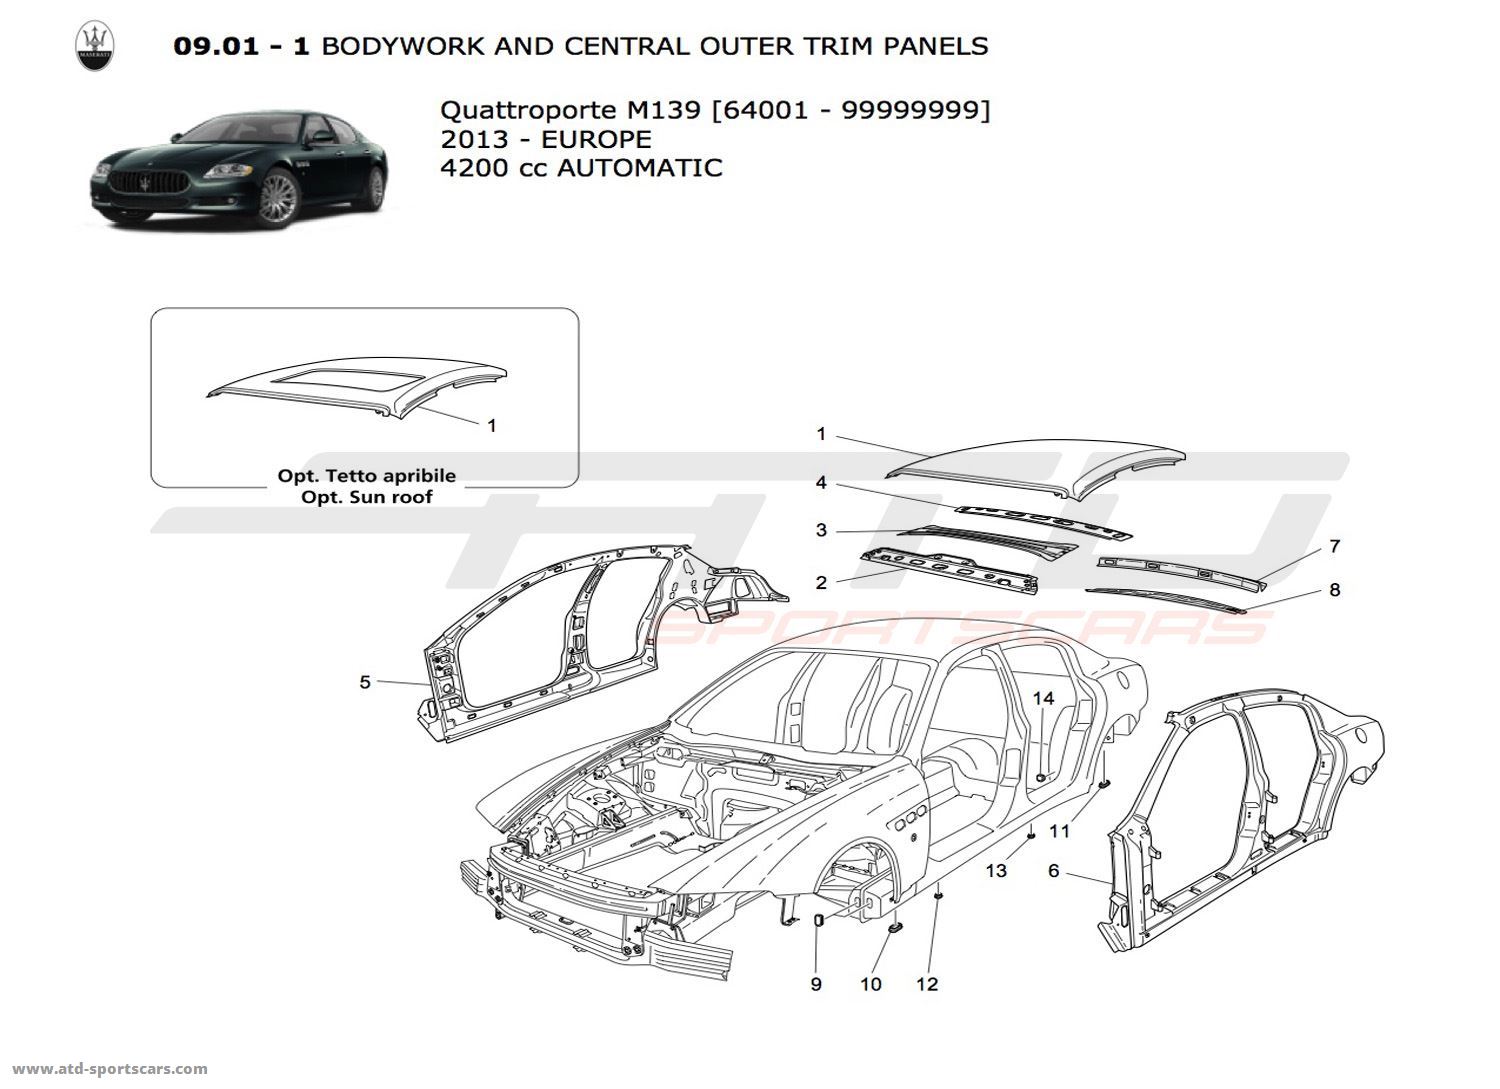 BODYWORK AND CENTRAL OUTER TRIM PANELS